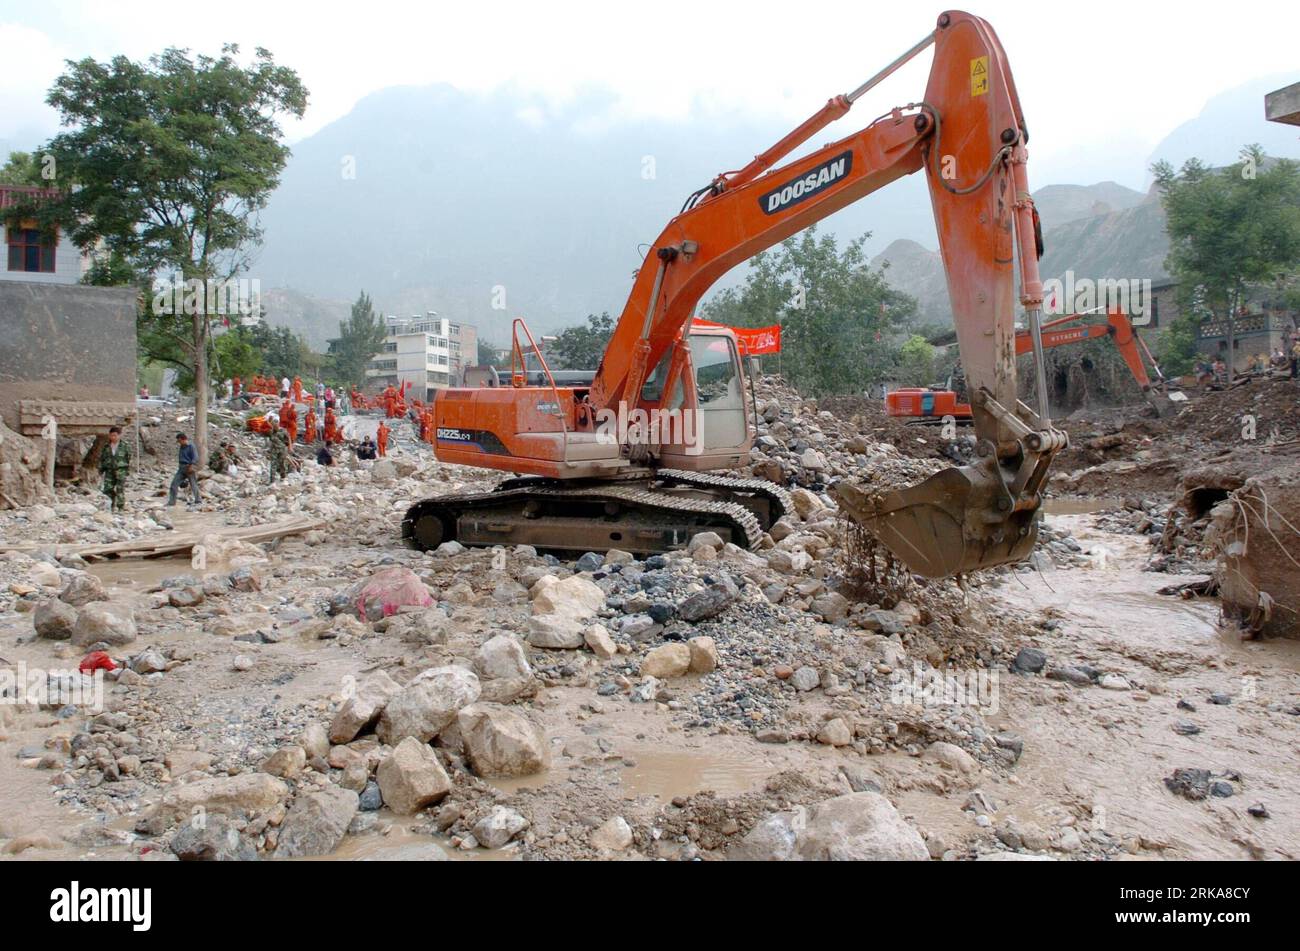 Bildnummer: 54285491  Datum: 09.08.2010  Copyright: imago/Xinhua (100809) -- ZHOUQU, Aug. 9, 2010 (Xinhua) -- An excavator works in landslide-hit Zhouqu County, Gannan Tibetan Autonomous Prefecture in northwest China s Gansu Province, Aug. 9, 2010. The death toll from rain-triggered mudslides in Zhouqu County has risen to 137 as of 4:07 p.m. Monday, with 1,348 others still missing, said the provincial civil affairs department. Rescuers with heavy equipments are racing against time in the search for survivors in the mudslide-flattened Zhouqu. (Xinhua/Gao Jianjun) (cxy) CHINA-GANSU-ZHOUQU-LANDSL Stock Photo